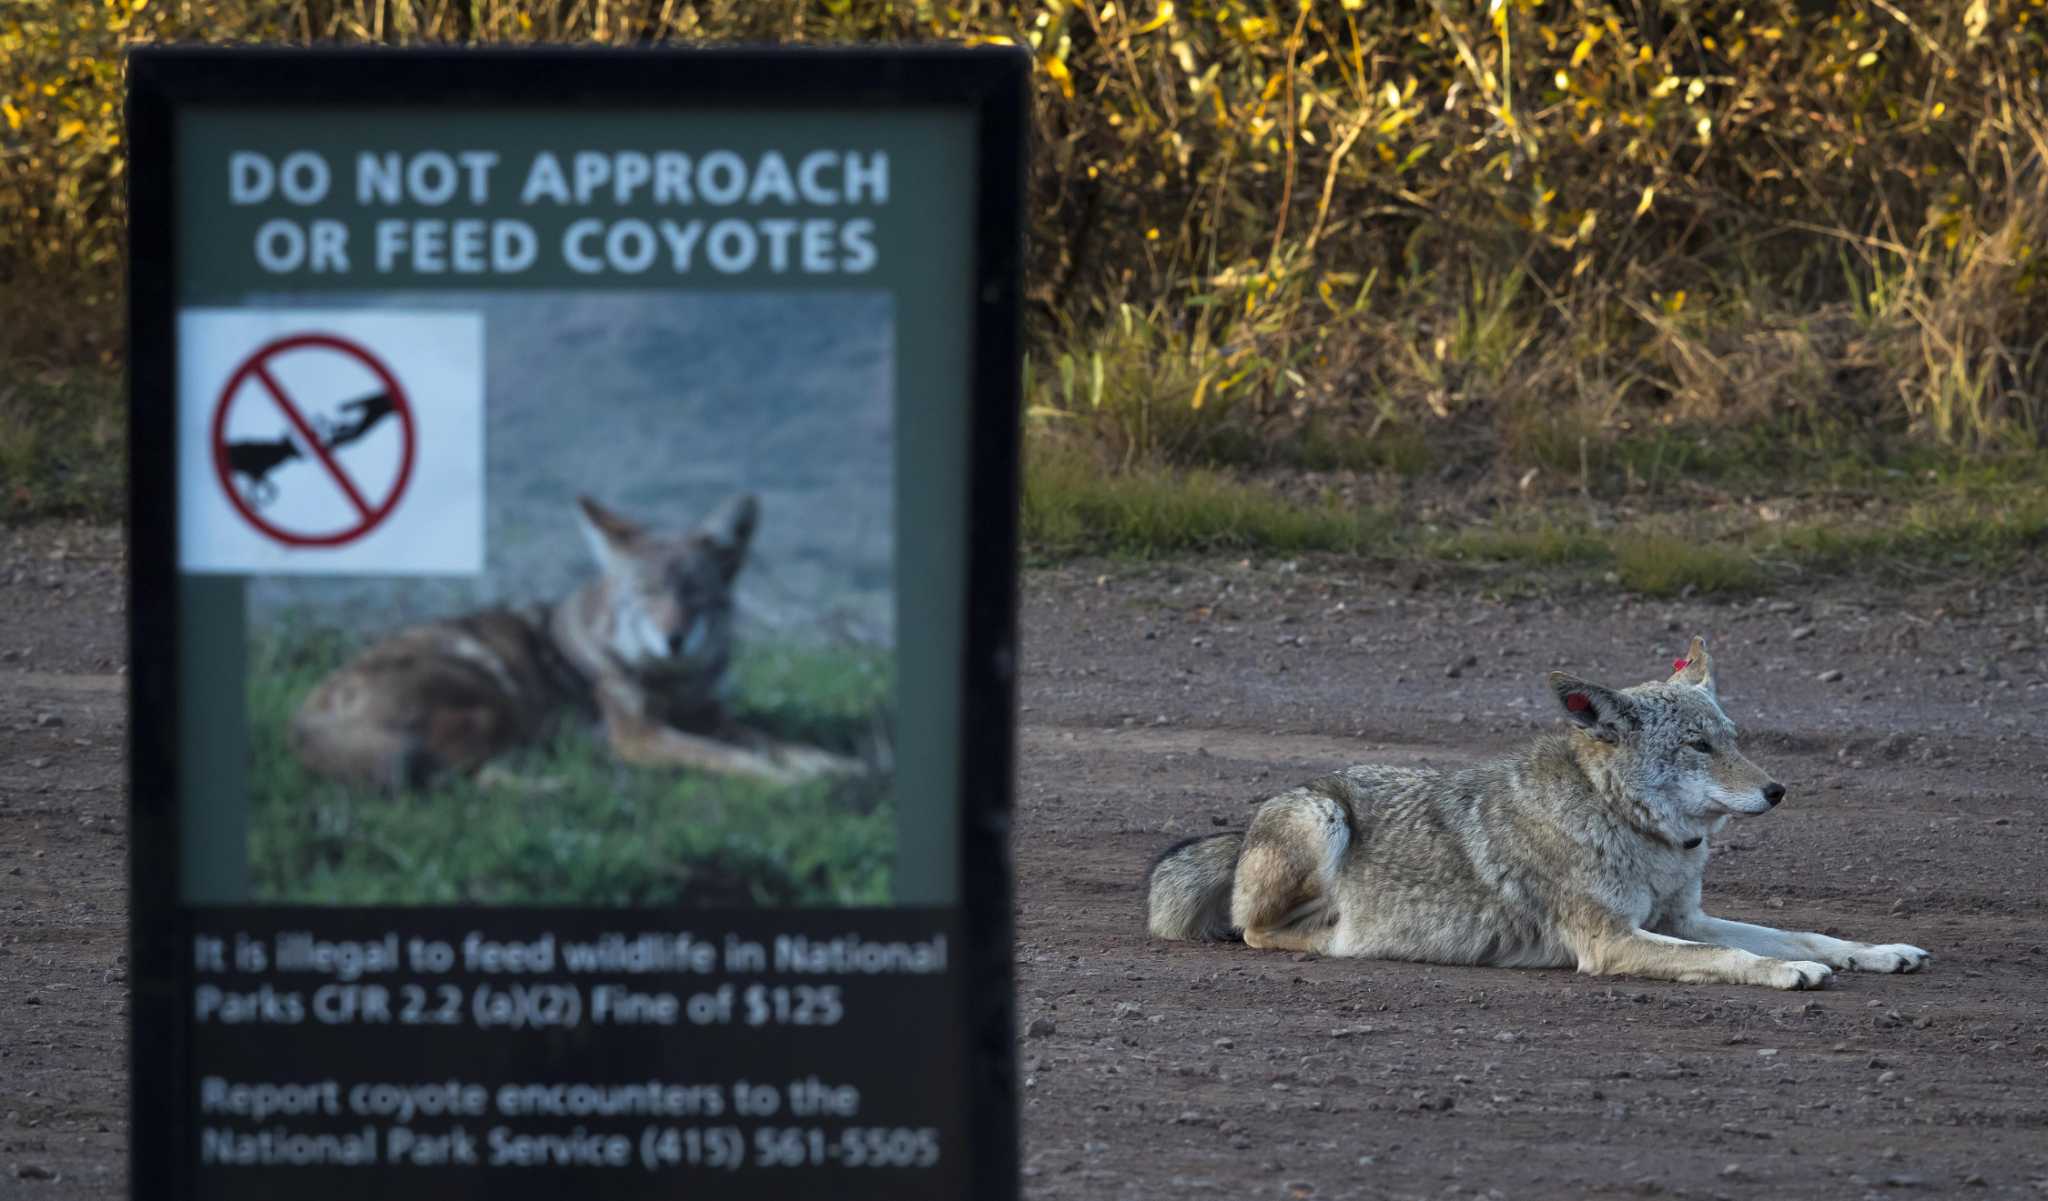 Coyotes — Friend or Foe?, Opinion